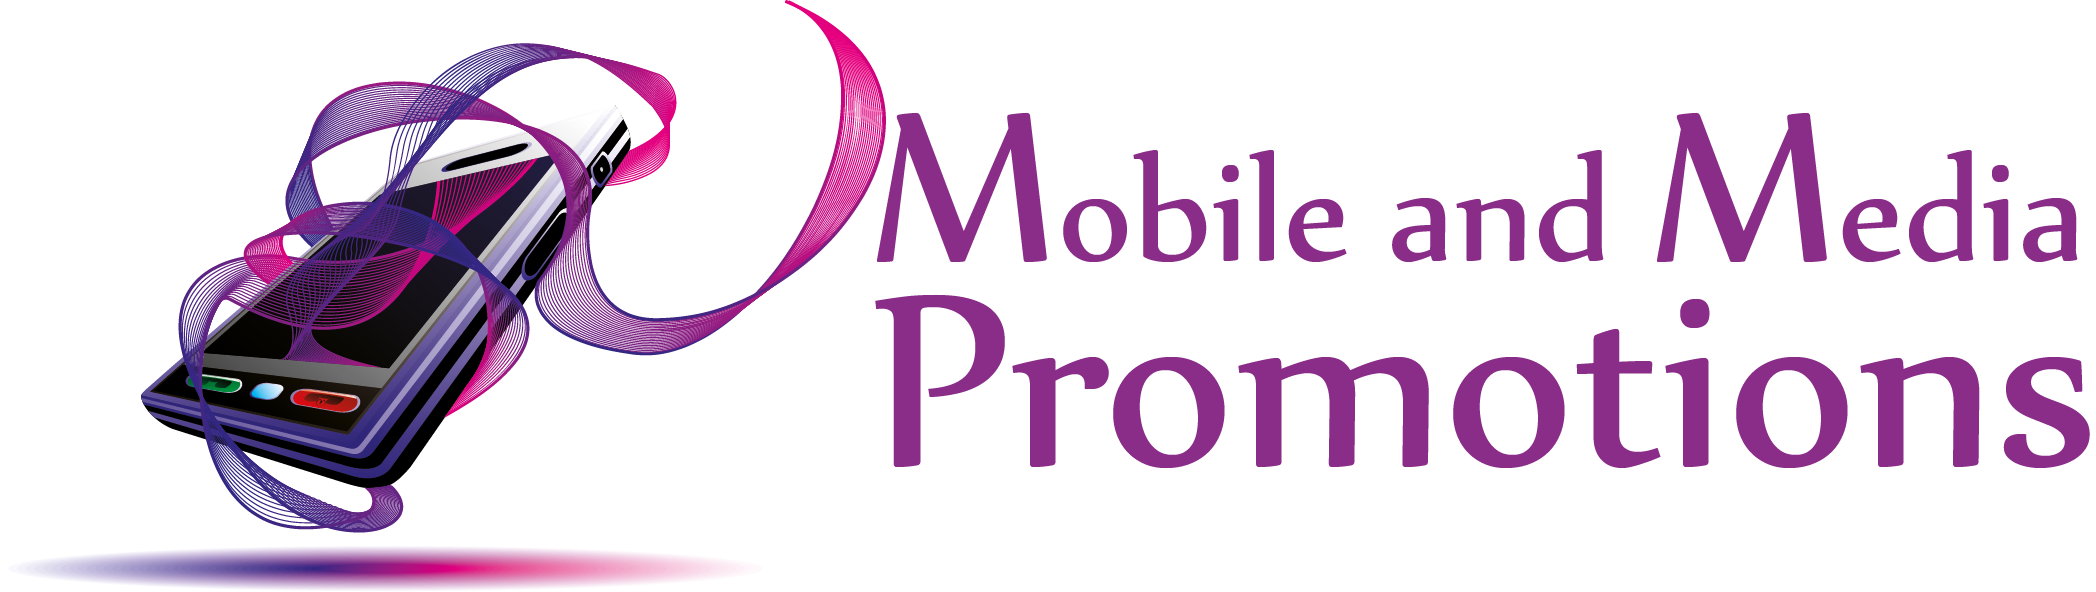 Mobile and Media Promotions